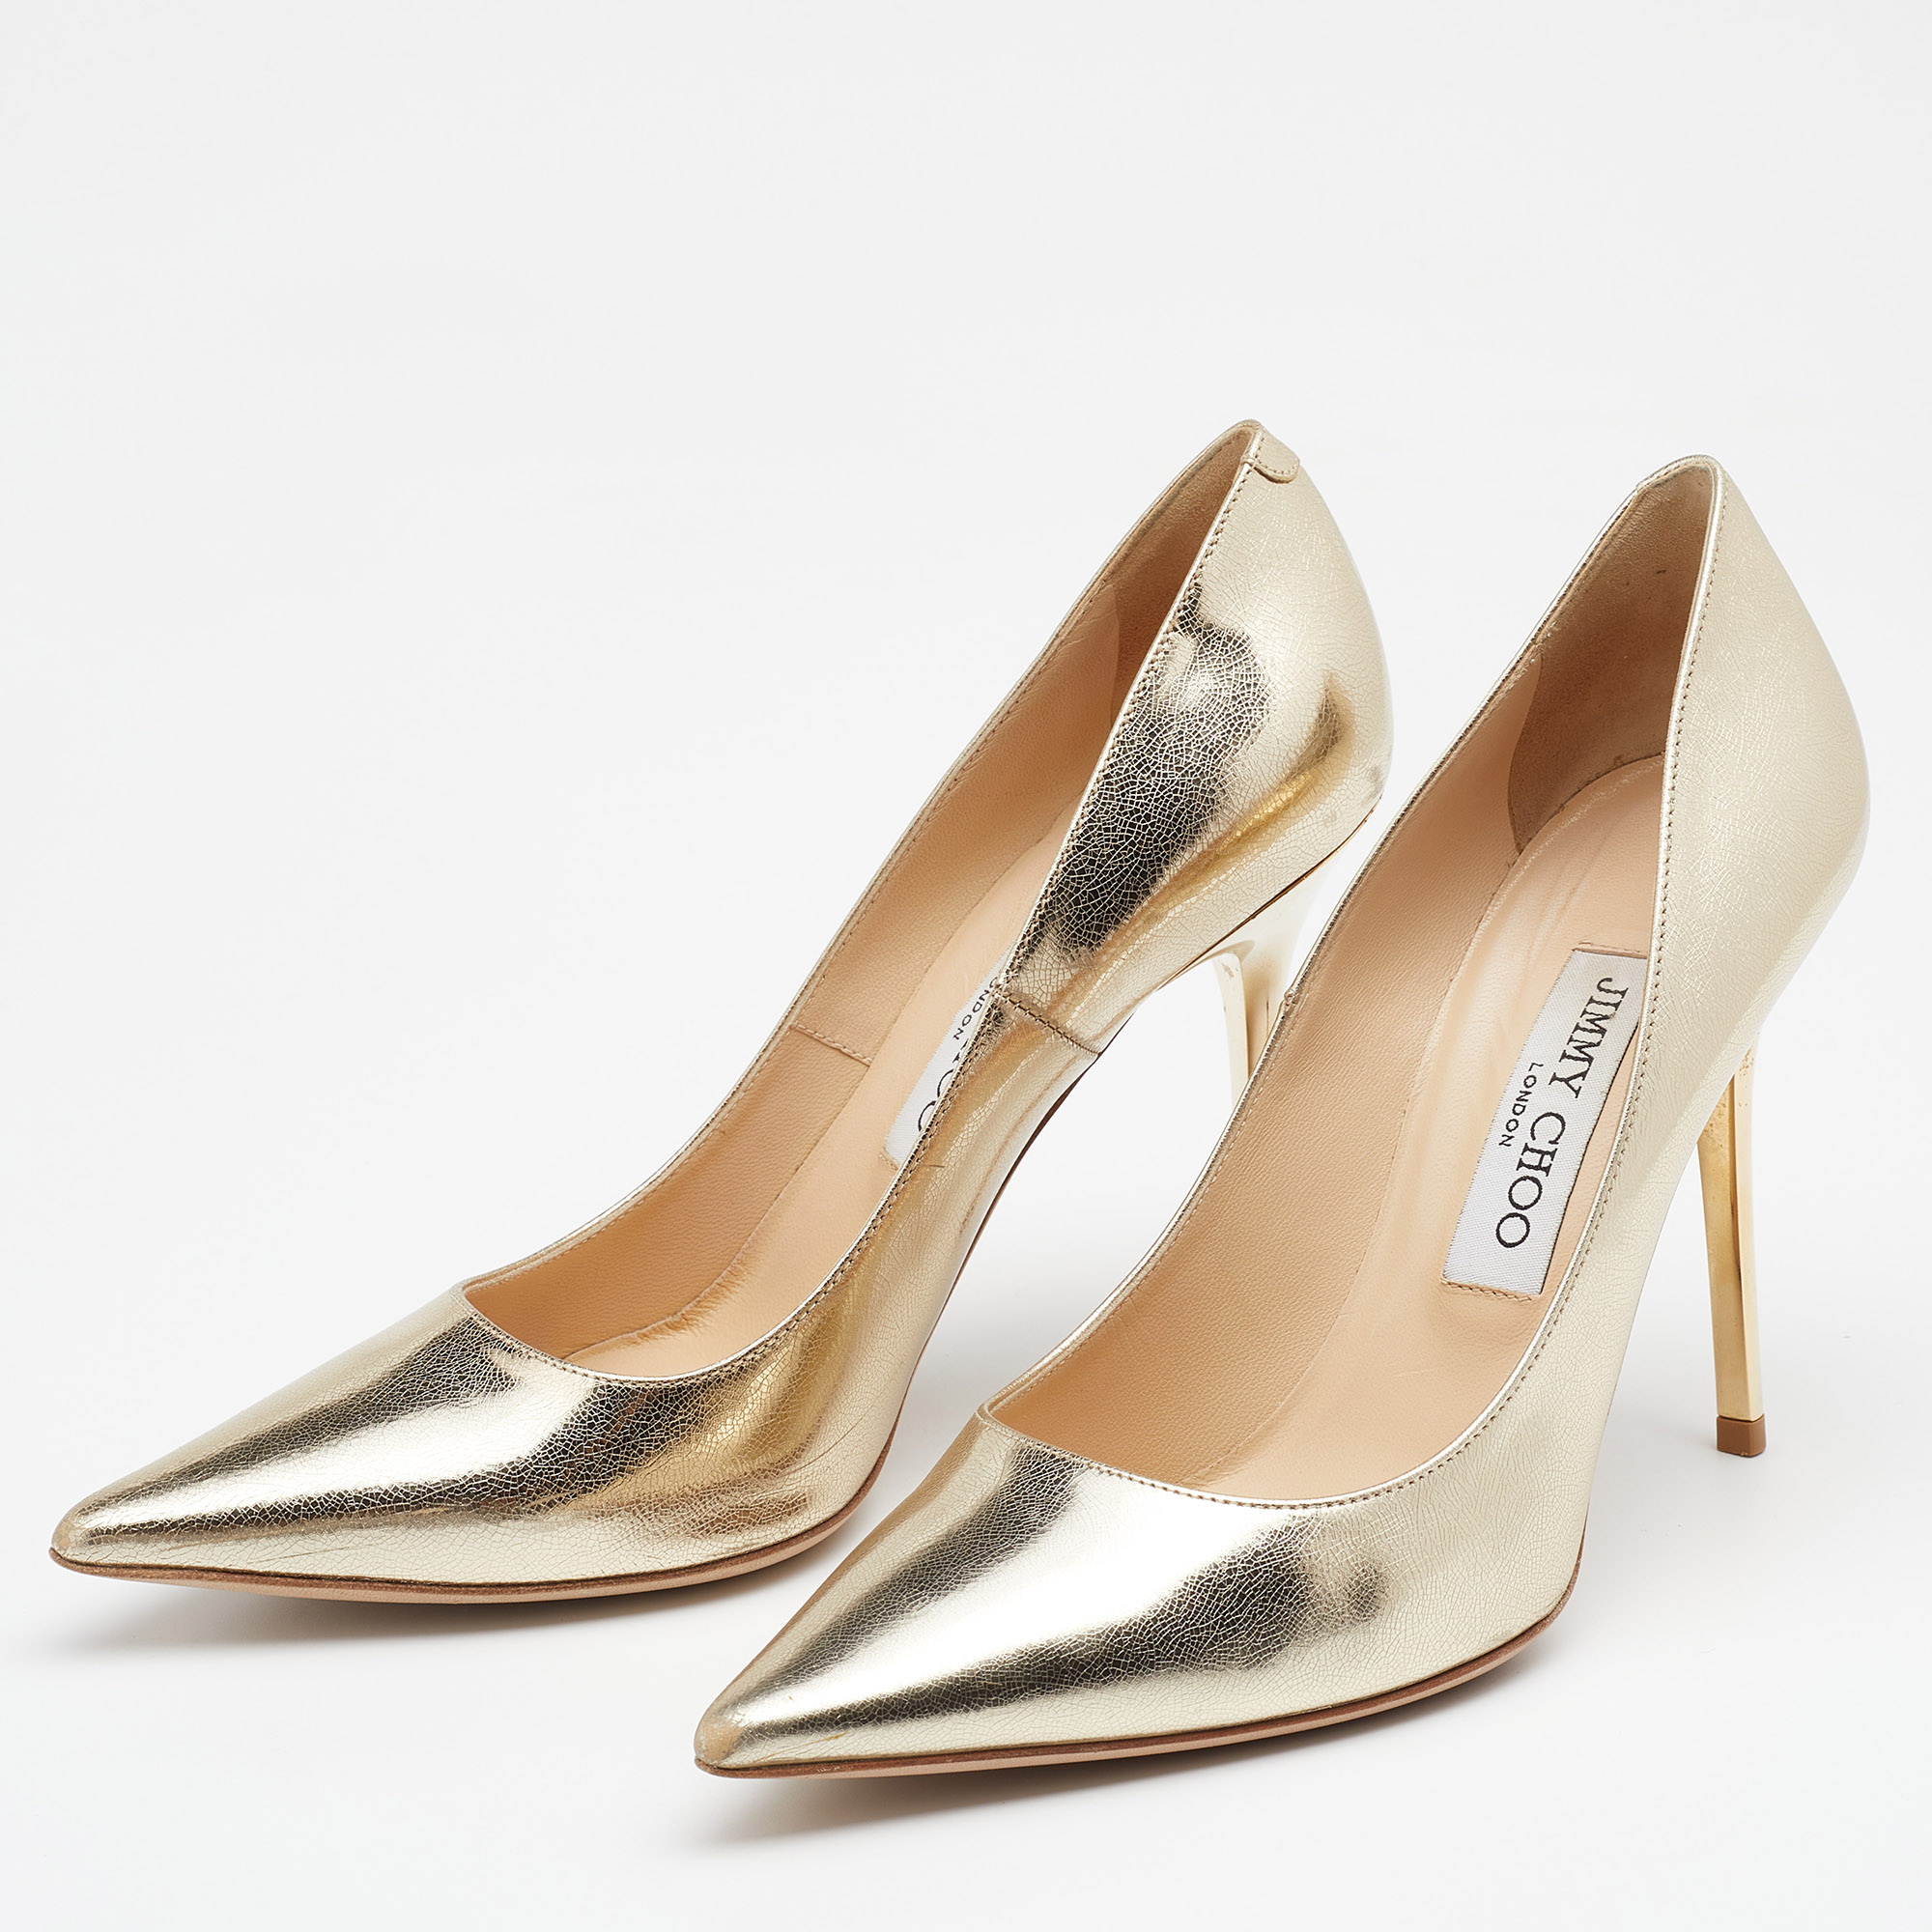 Jimmy Choo Metallic Gold Leather Anouk Pointed Pumps Size